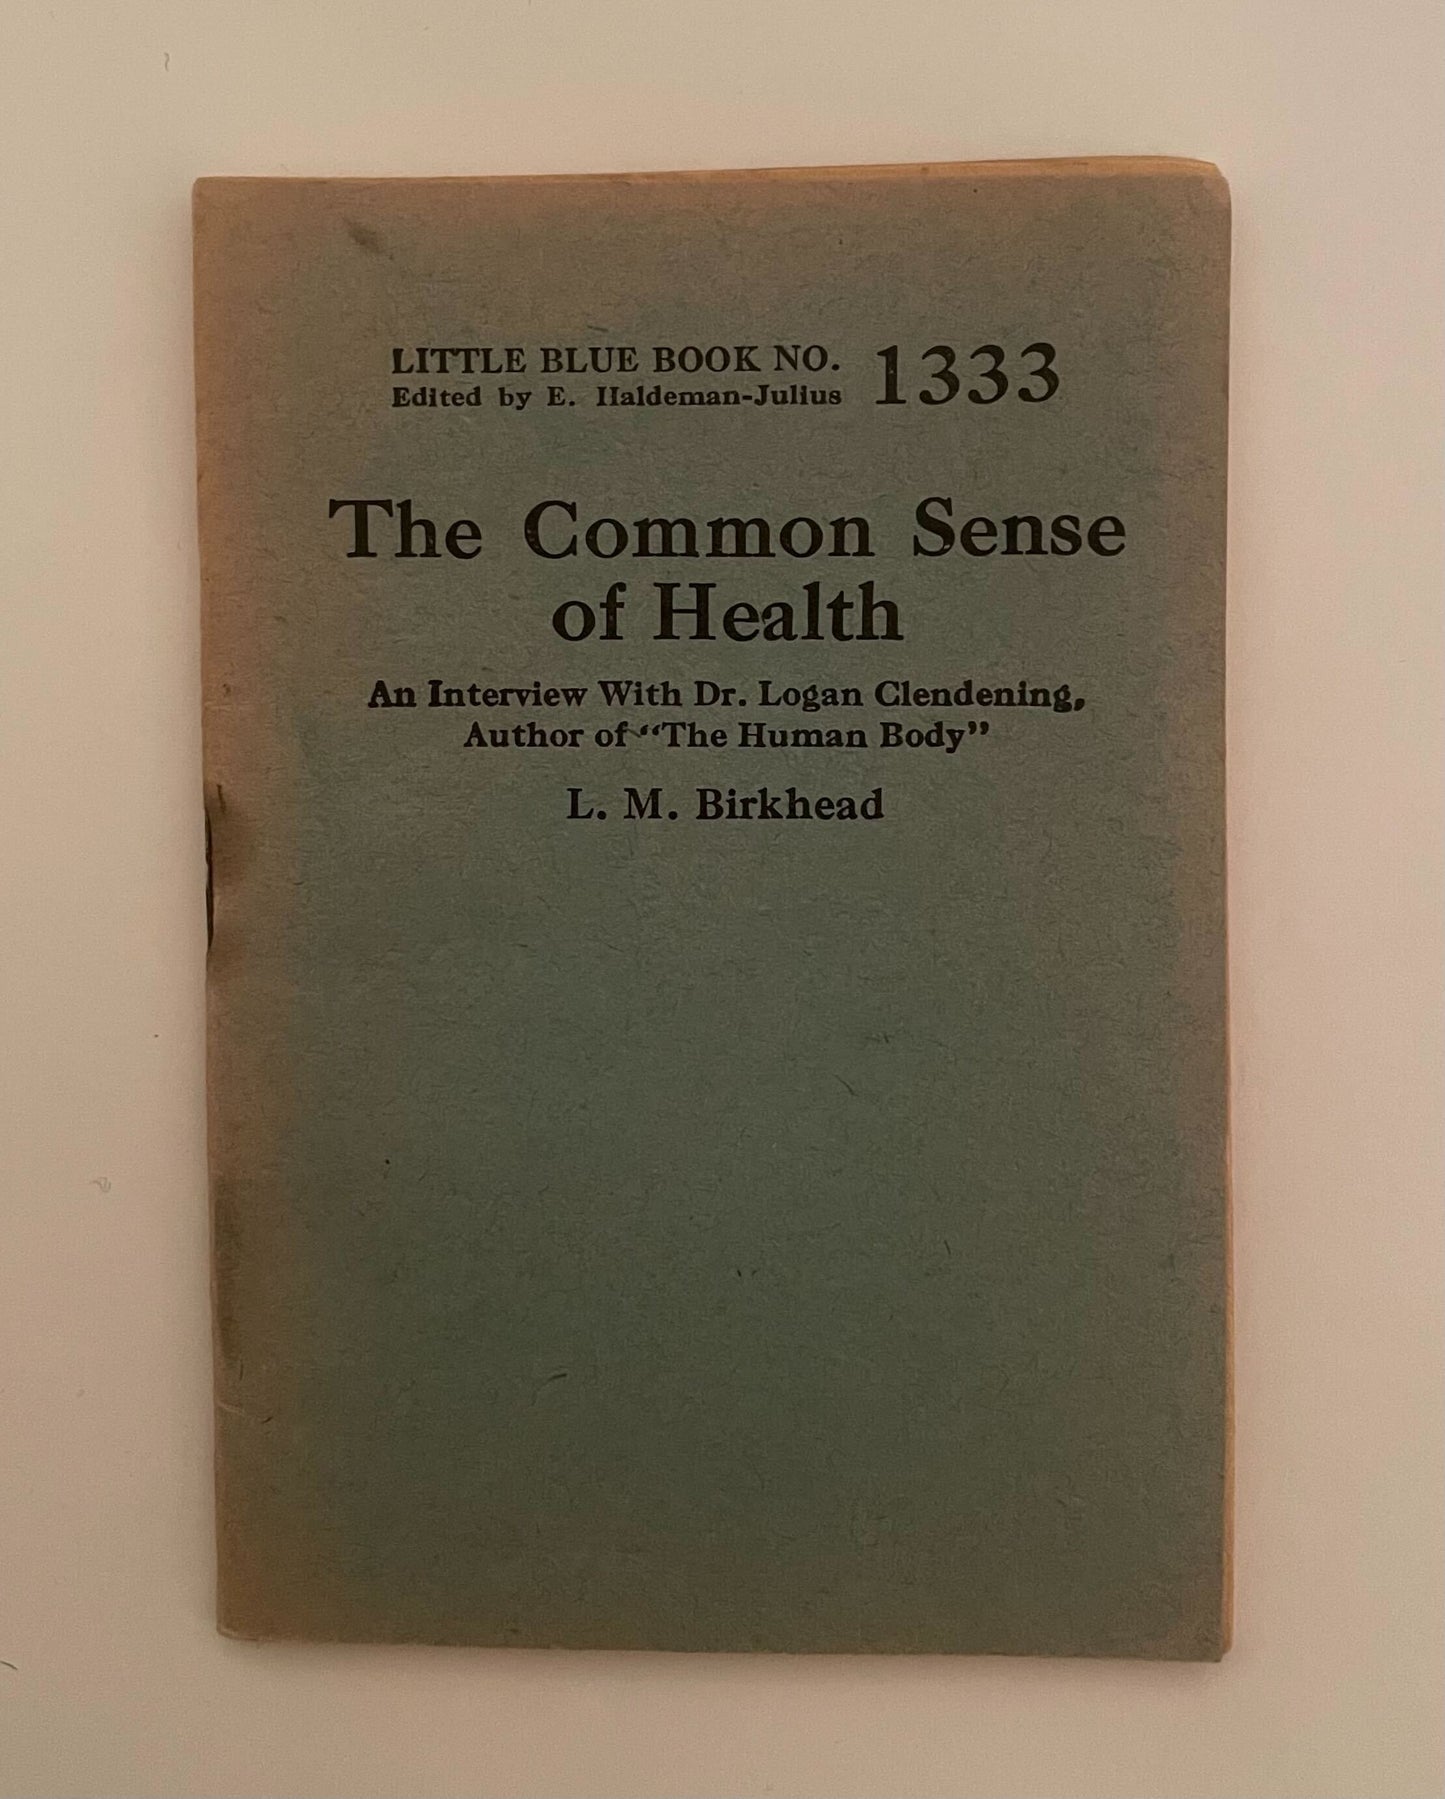 suspect pamphlets from the 1930's (Little Blue Book)